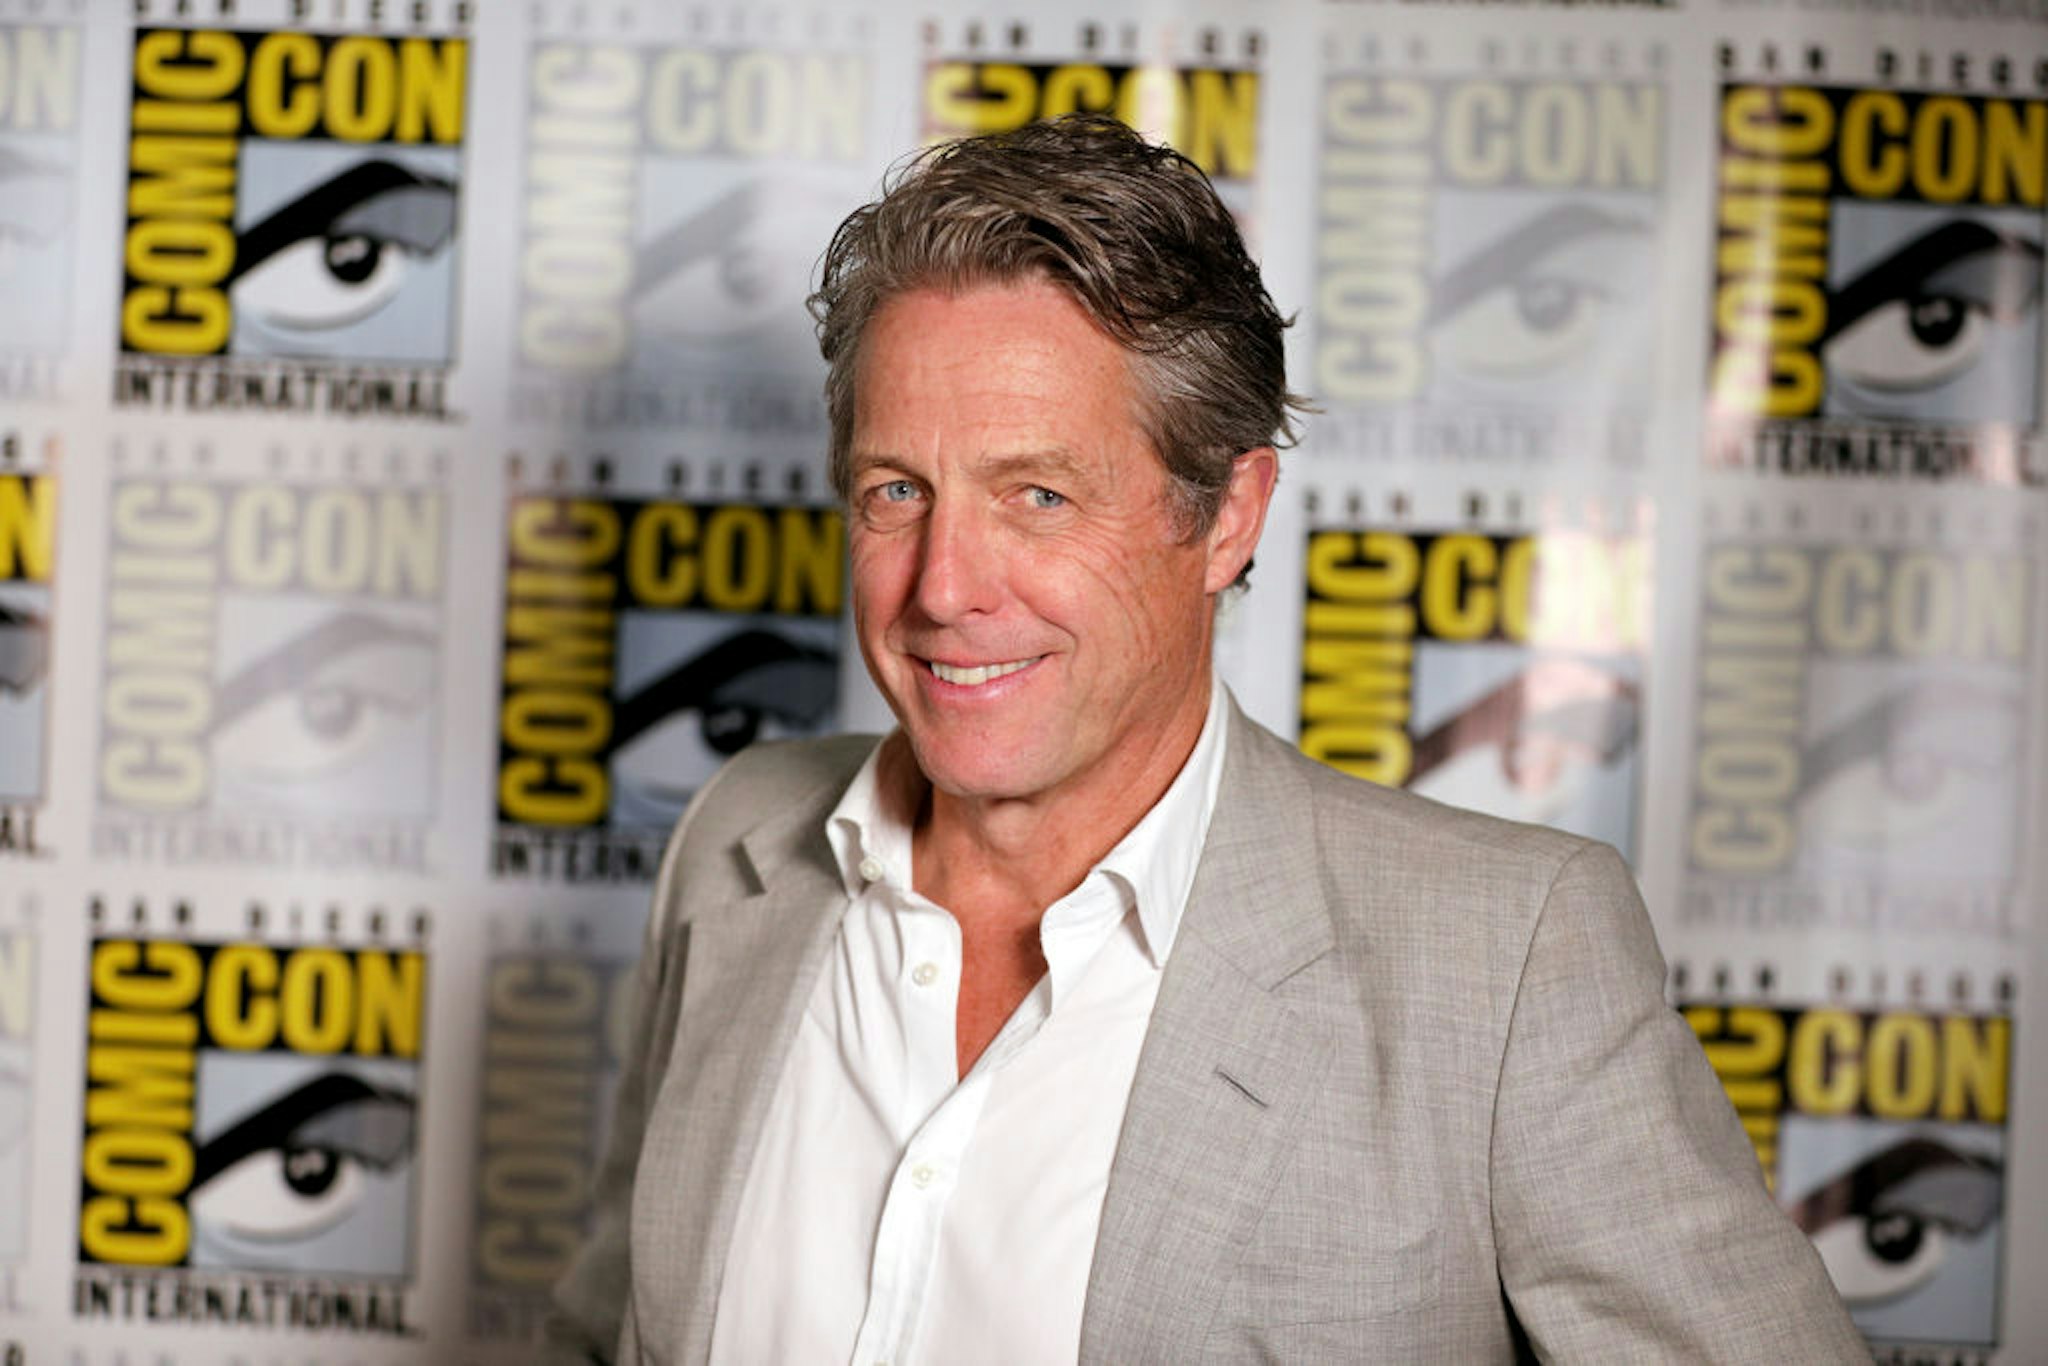 SAN DIEGO, CALIFORNIA - JULY 21: Hugh Grant attends Paramount Pictures and eOne's Comic-Con presentation of "Dungeons &amp; Dragons: Honor Among Thieves" in Hall H at the San Diego Convention Center on July 21, 2022. (Photo by Daniel Knighton/Getty Images for Paramount Pictured)